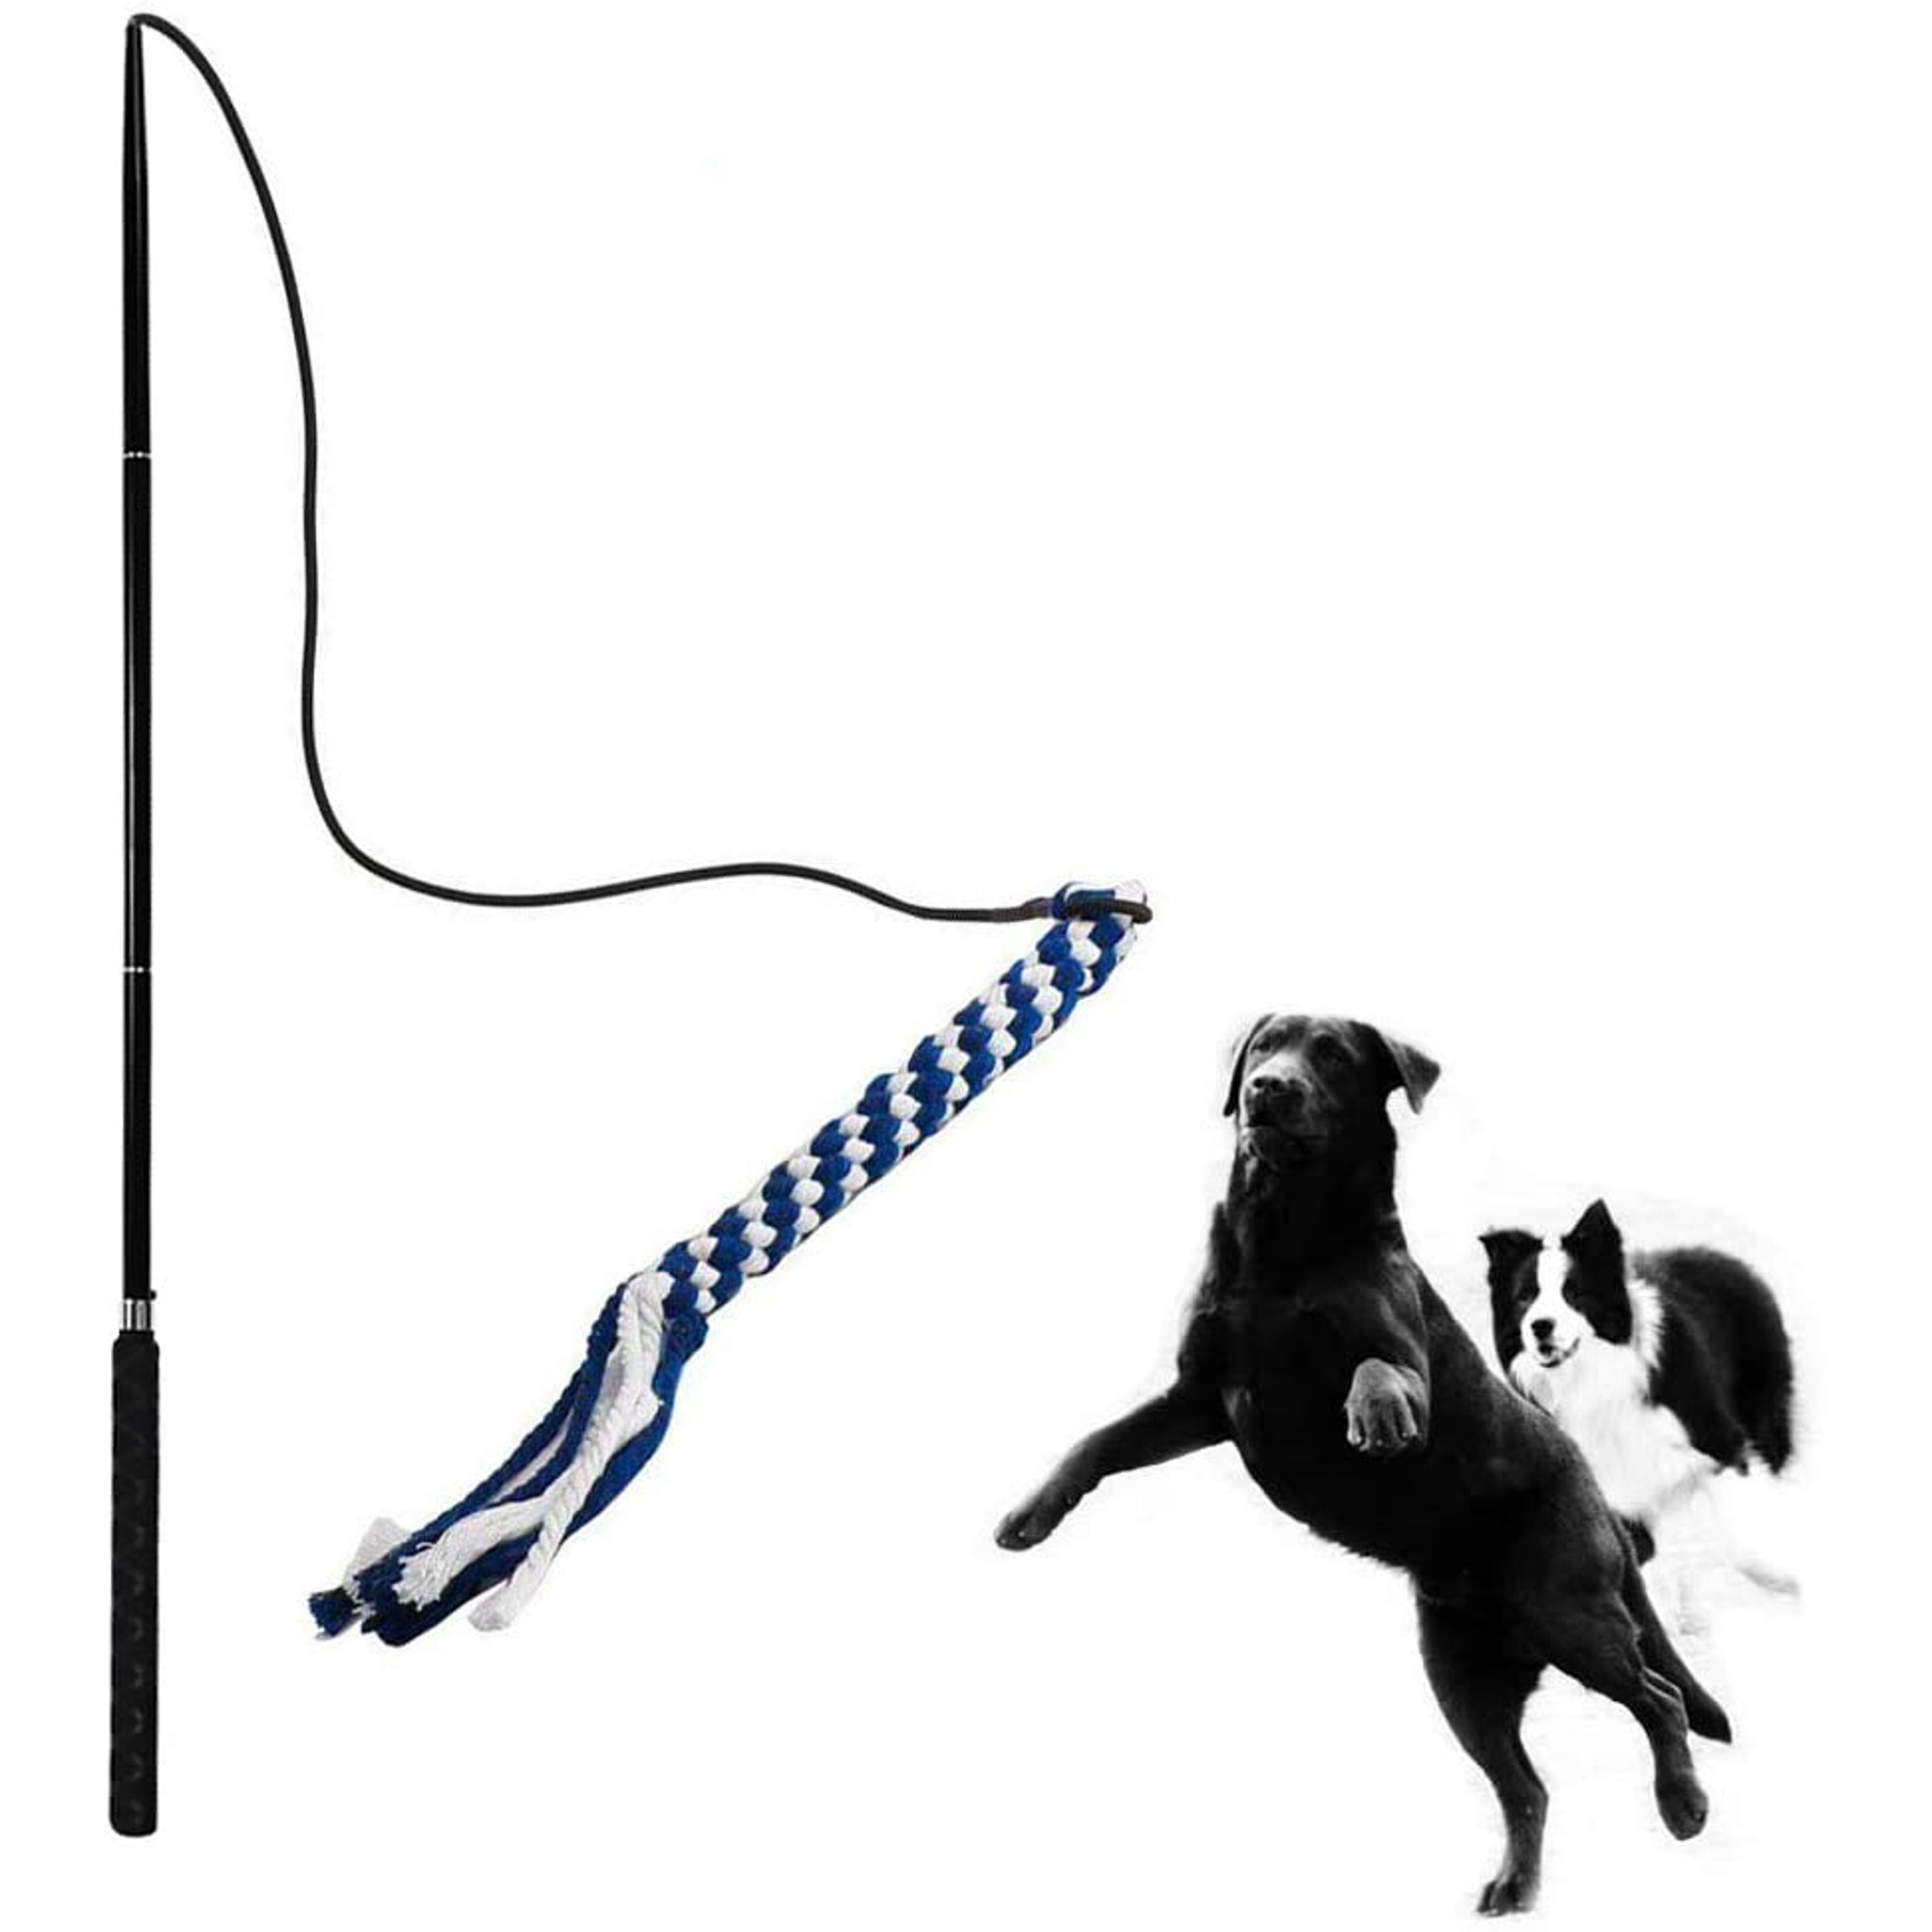 Dog Toy Strong Funny Chasing Exercise Teaser Wand flirt pole training for dogs